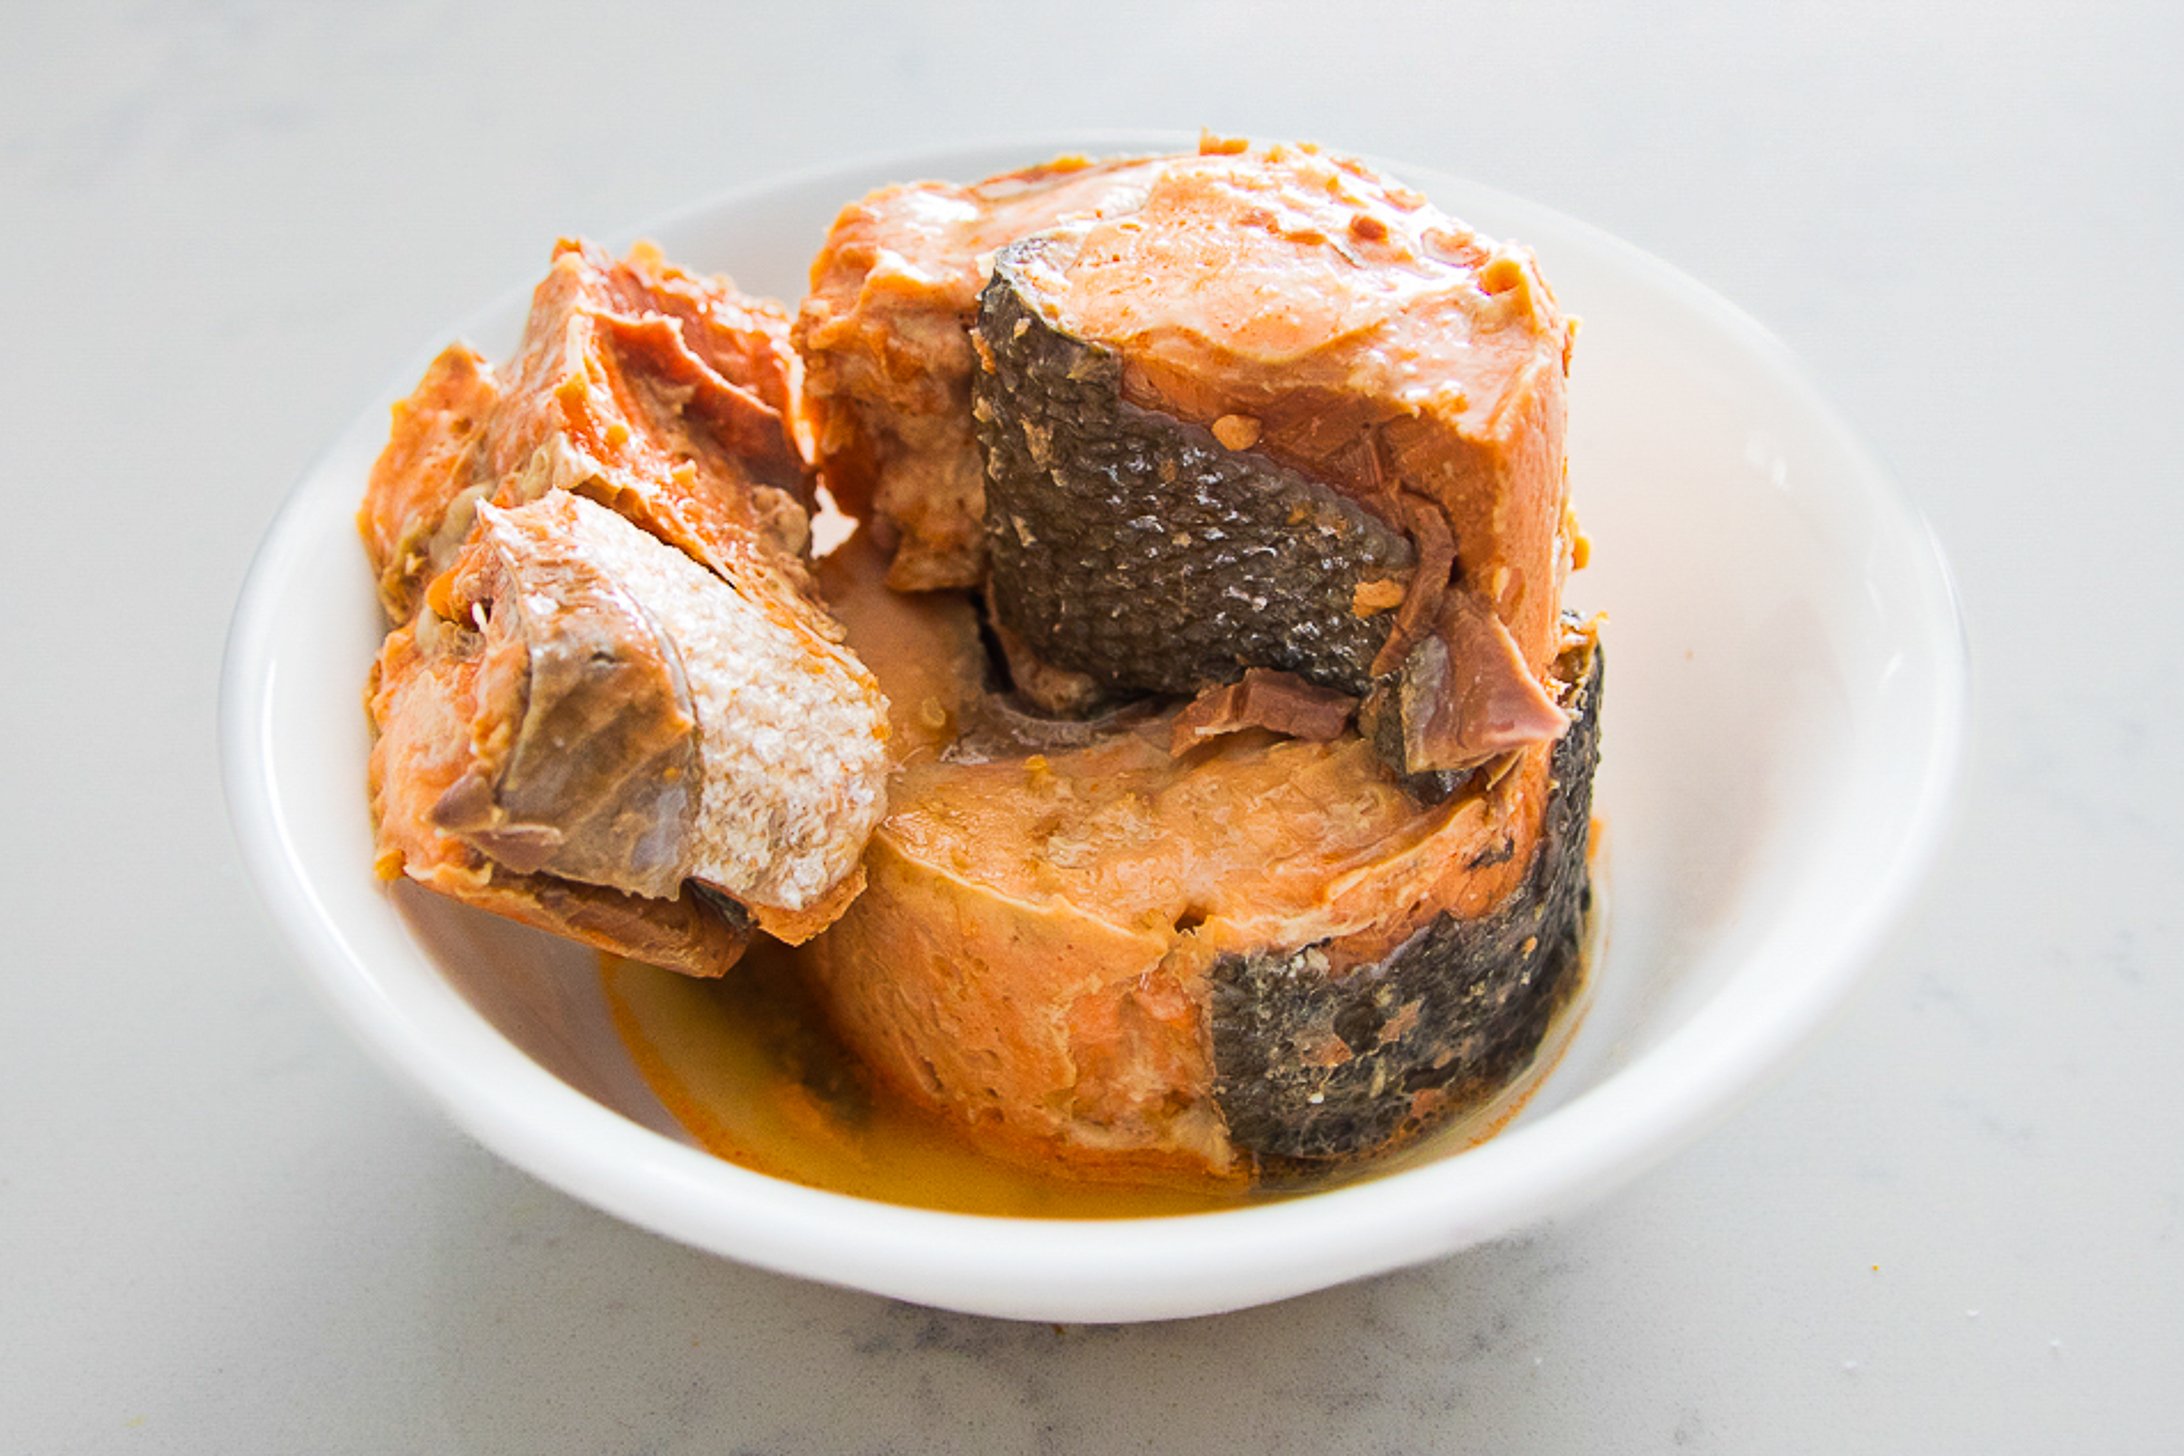 A bowl filled to the rim with canned salmon with skin.